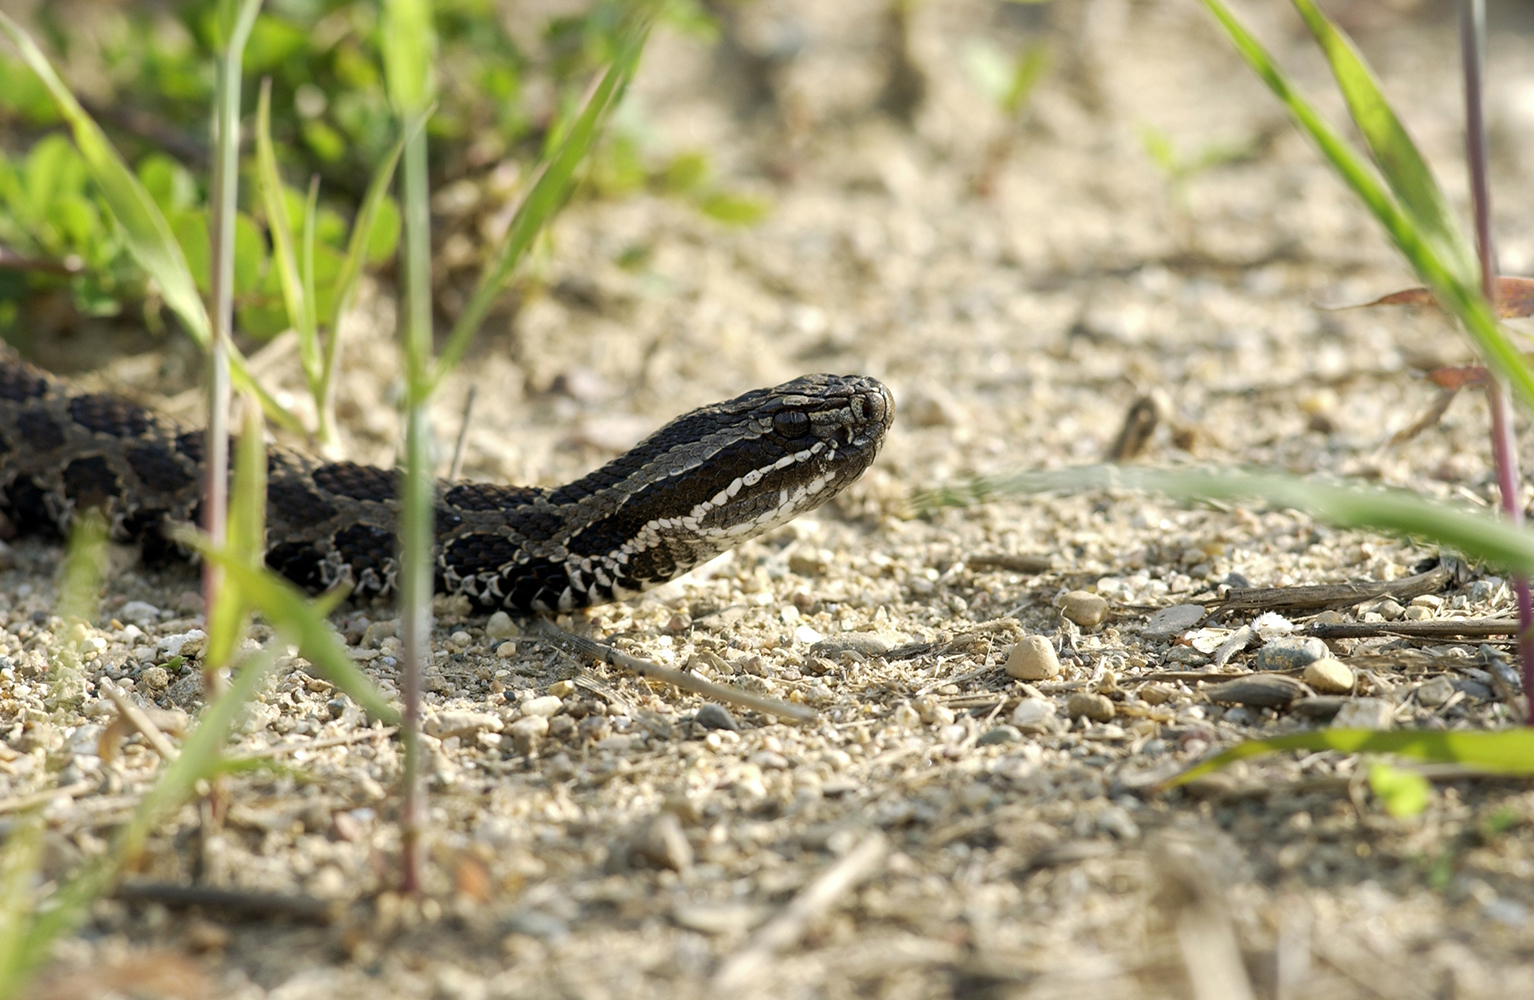 Massasauga rattlesnakes are found in wetland areas in Michigan.